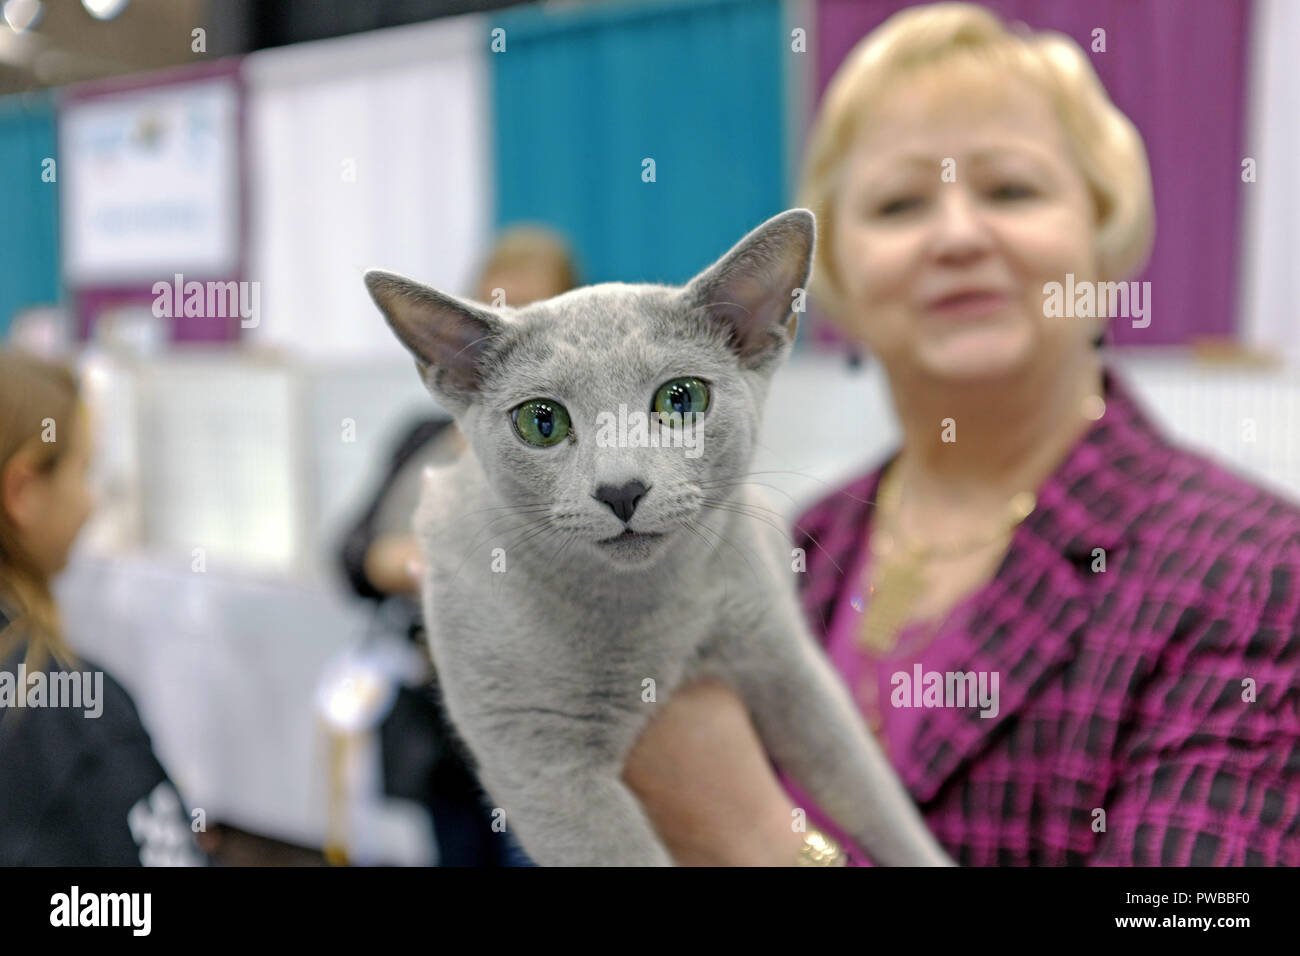 Cleveland, Ohio, USA, 14th Oct, 2018.  A Russian Blue cat with its short hair and green eyes is being carried away from a cat judging ring after winning a round at the 2018 CFA International Cat Show in Cleveland, Ohio, USA.  The two-day pedigreed cat competition is the largest of its type in the US attracting of 1,000 competing cats representing dozens of breeds from Europe, Asia, and the US.  The cat show runs from October 13-14 at the IX Center in Cleveland, Ohio, USA. Credit: Mark Kanning/Alamy Live News. Stock Photo